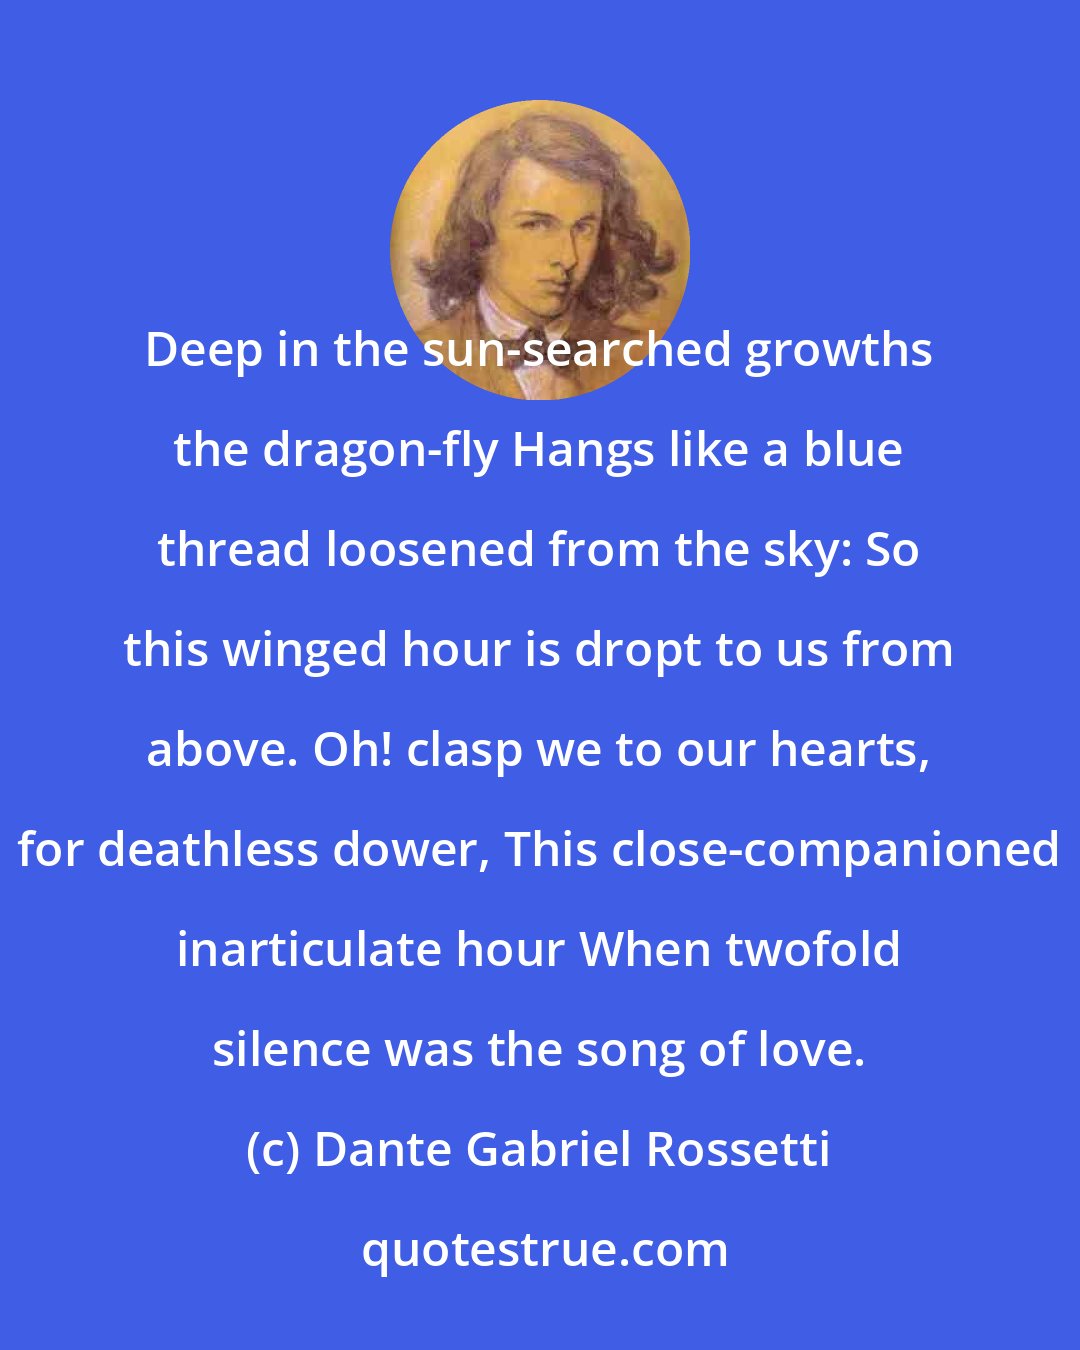 Dante Gabriel Rossetti: Deep in the sun-searched growths the dragon-fly Hangs like a blue thread loosened from the sky: So this winged hour is dropt to us from above. Oh! clasp we to our hearts, for deathless dower, This close-companioned inarticulate hour When twofold silence was the song of love.